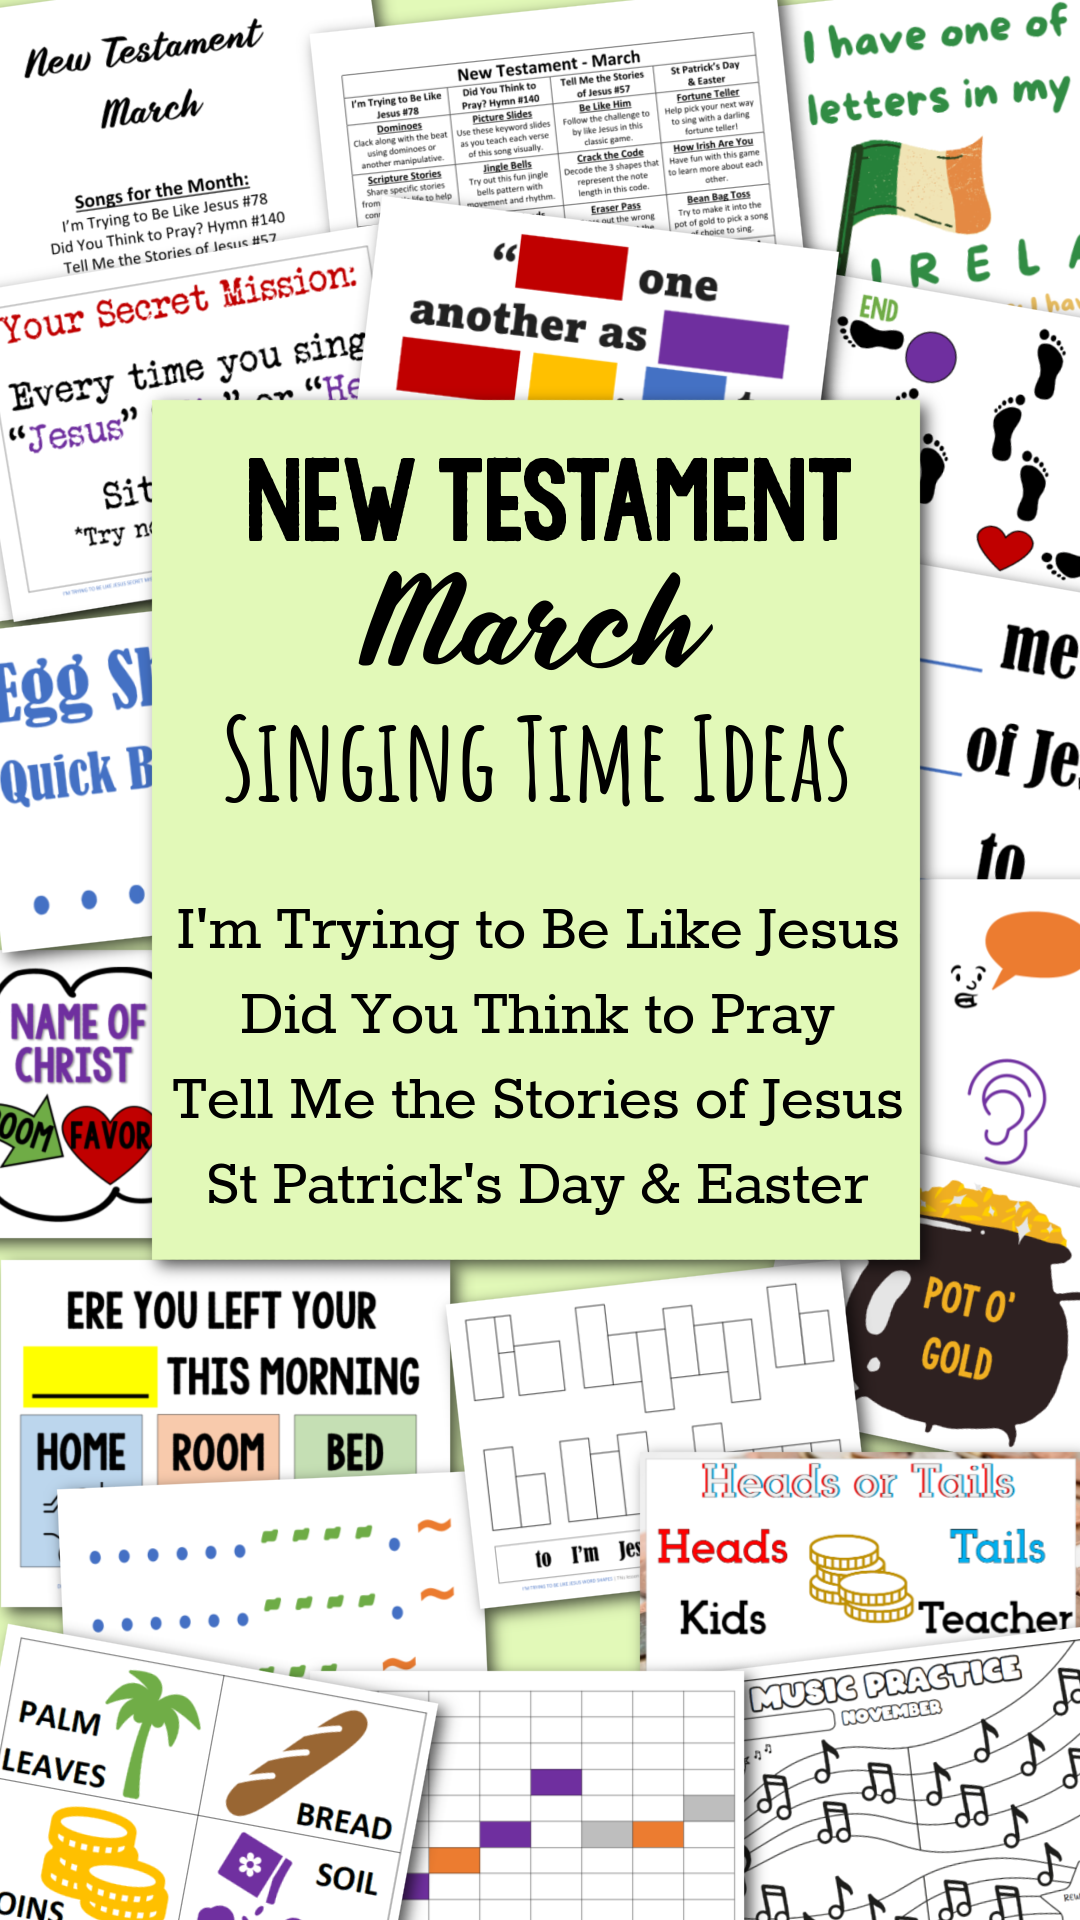 New Testament March Primary Songs Singing time ideas for Primary Music Leaders NT March Singing Time Ideas